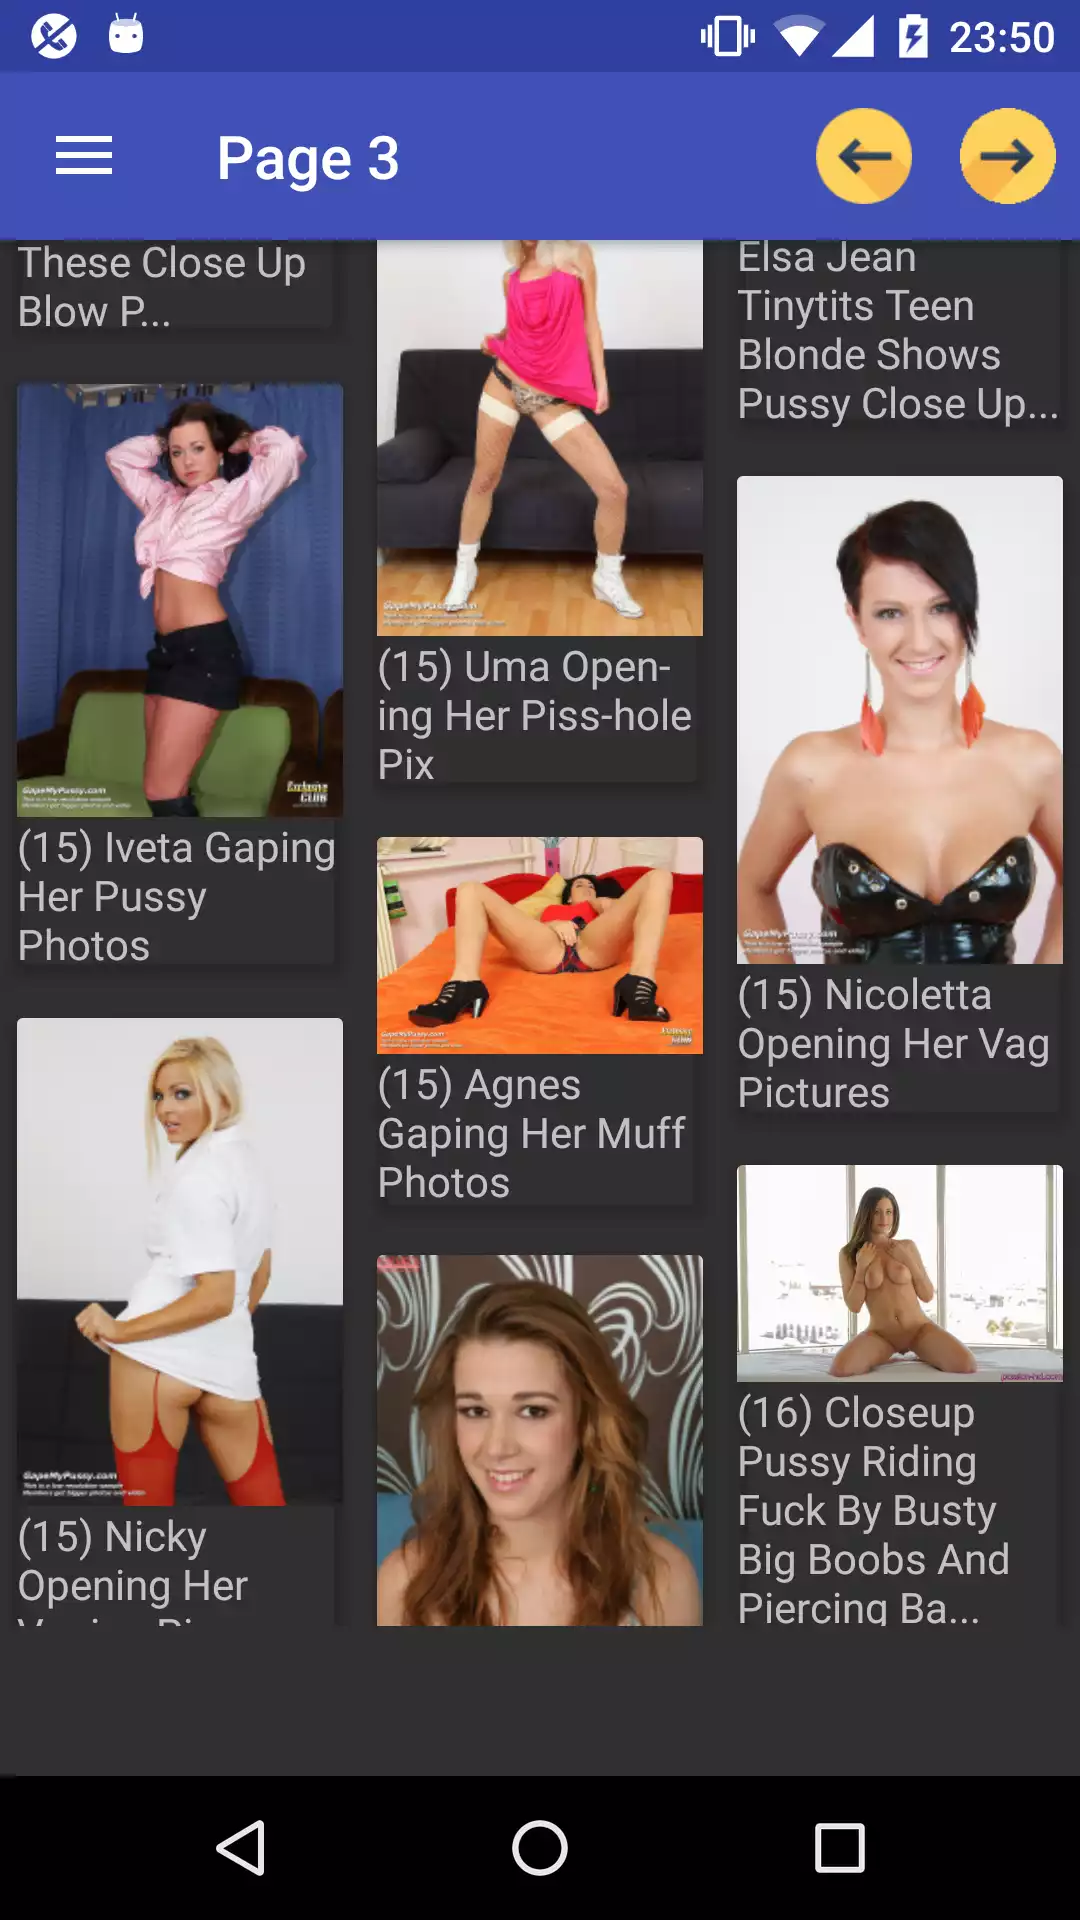 Closeup Galleries collection,femboy,closeup,pic,pics,porn,gallery,mod,puzzles,panties,photo,galleries,apps,download,texas,alexis,apk,hentay,star,picture,pictures,image,and,hentai,perfectshemales,amateur,sexy,app